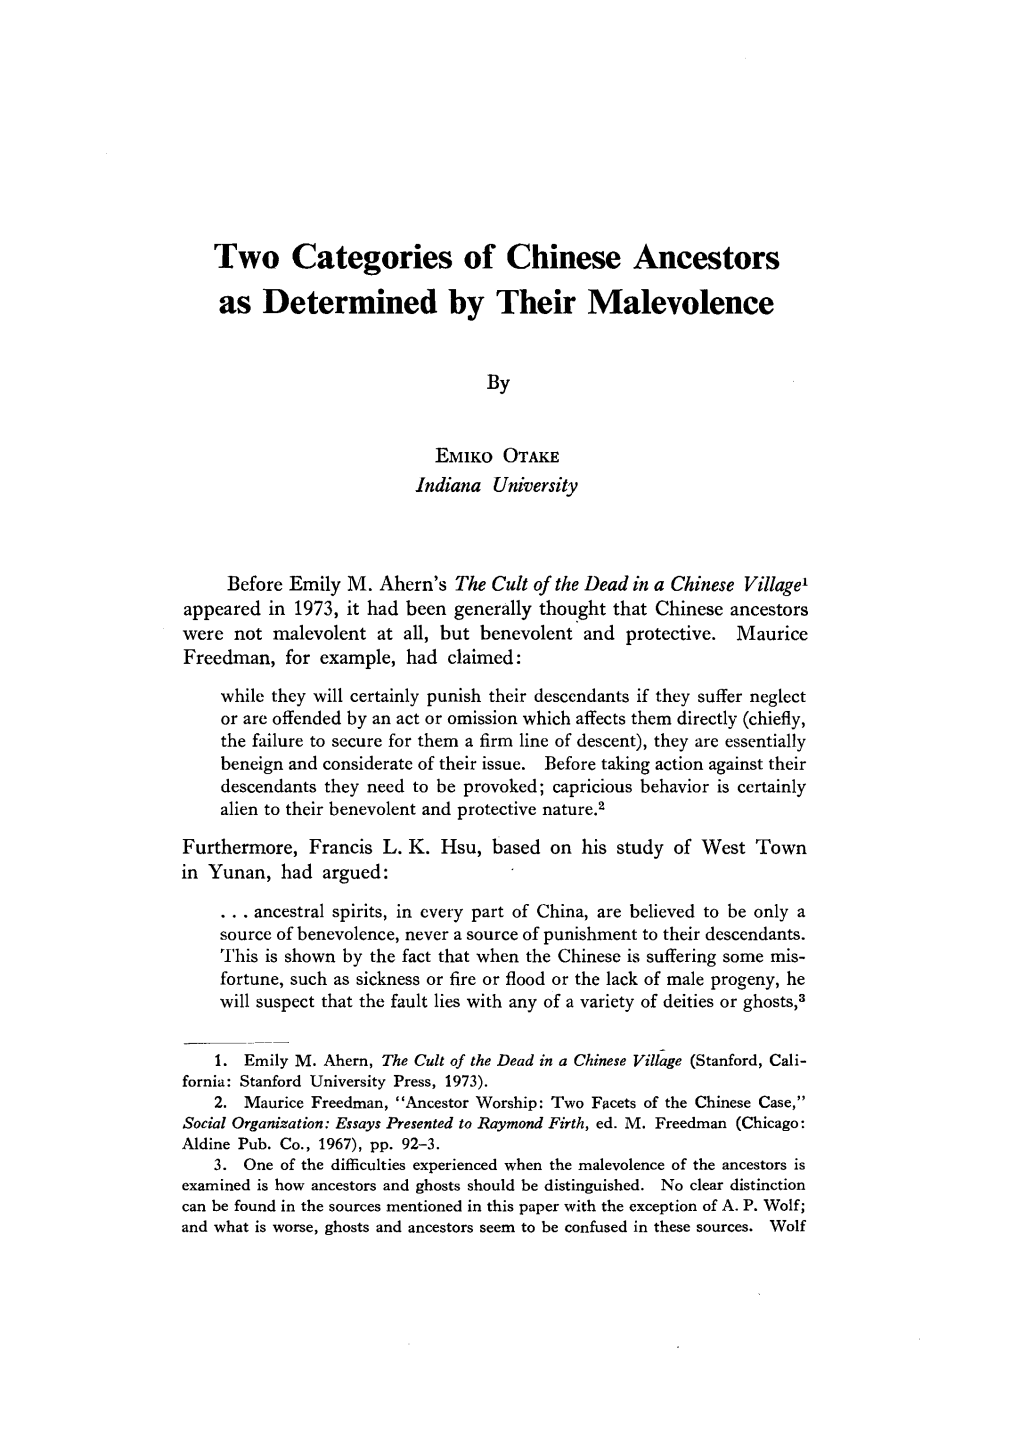 Two Categories of Chinese Ancestors As Determined by Their Malevolence